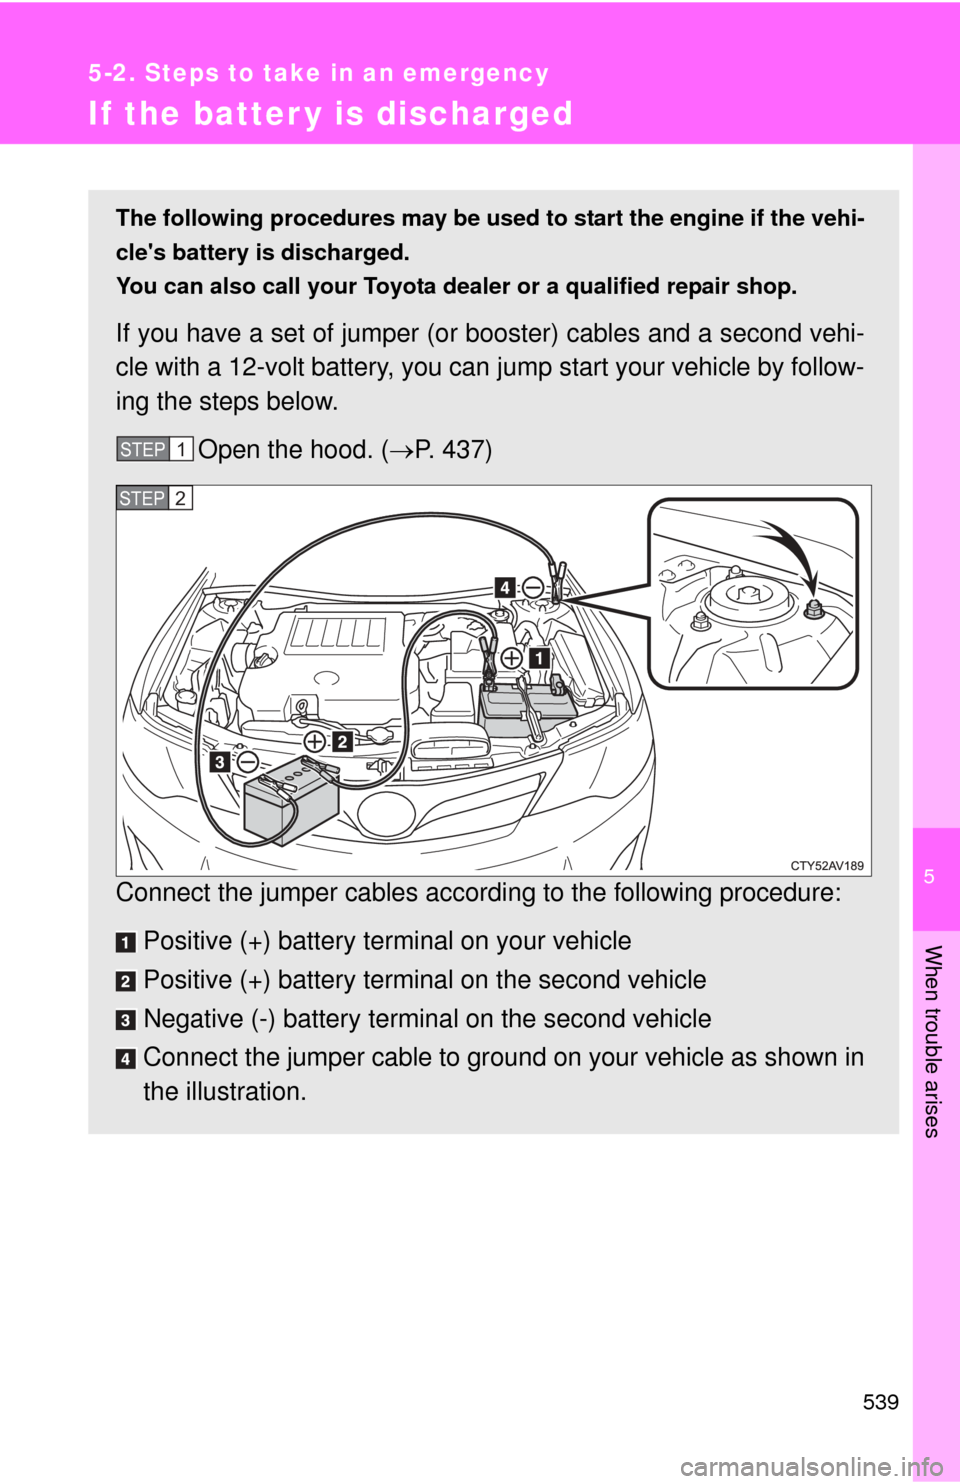 TOYOTA CAMRY 2014 XV50 / 9.G Owners Manual 5
When trouble arises
539
5-2. Steps to take in an emergency
If the batter y is discharged
The following procedures may be used to start the engine if the vehi-
cles battery is discharged.
You can al